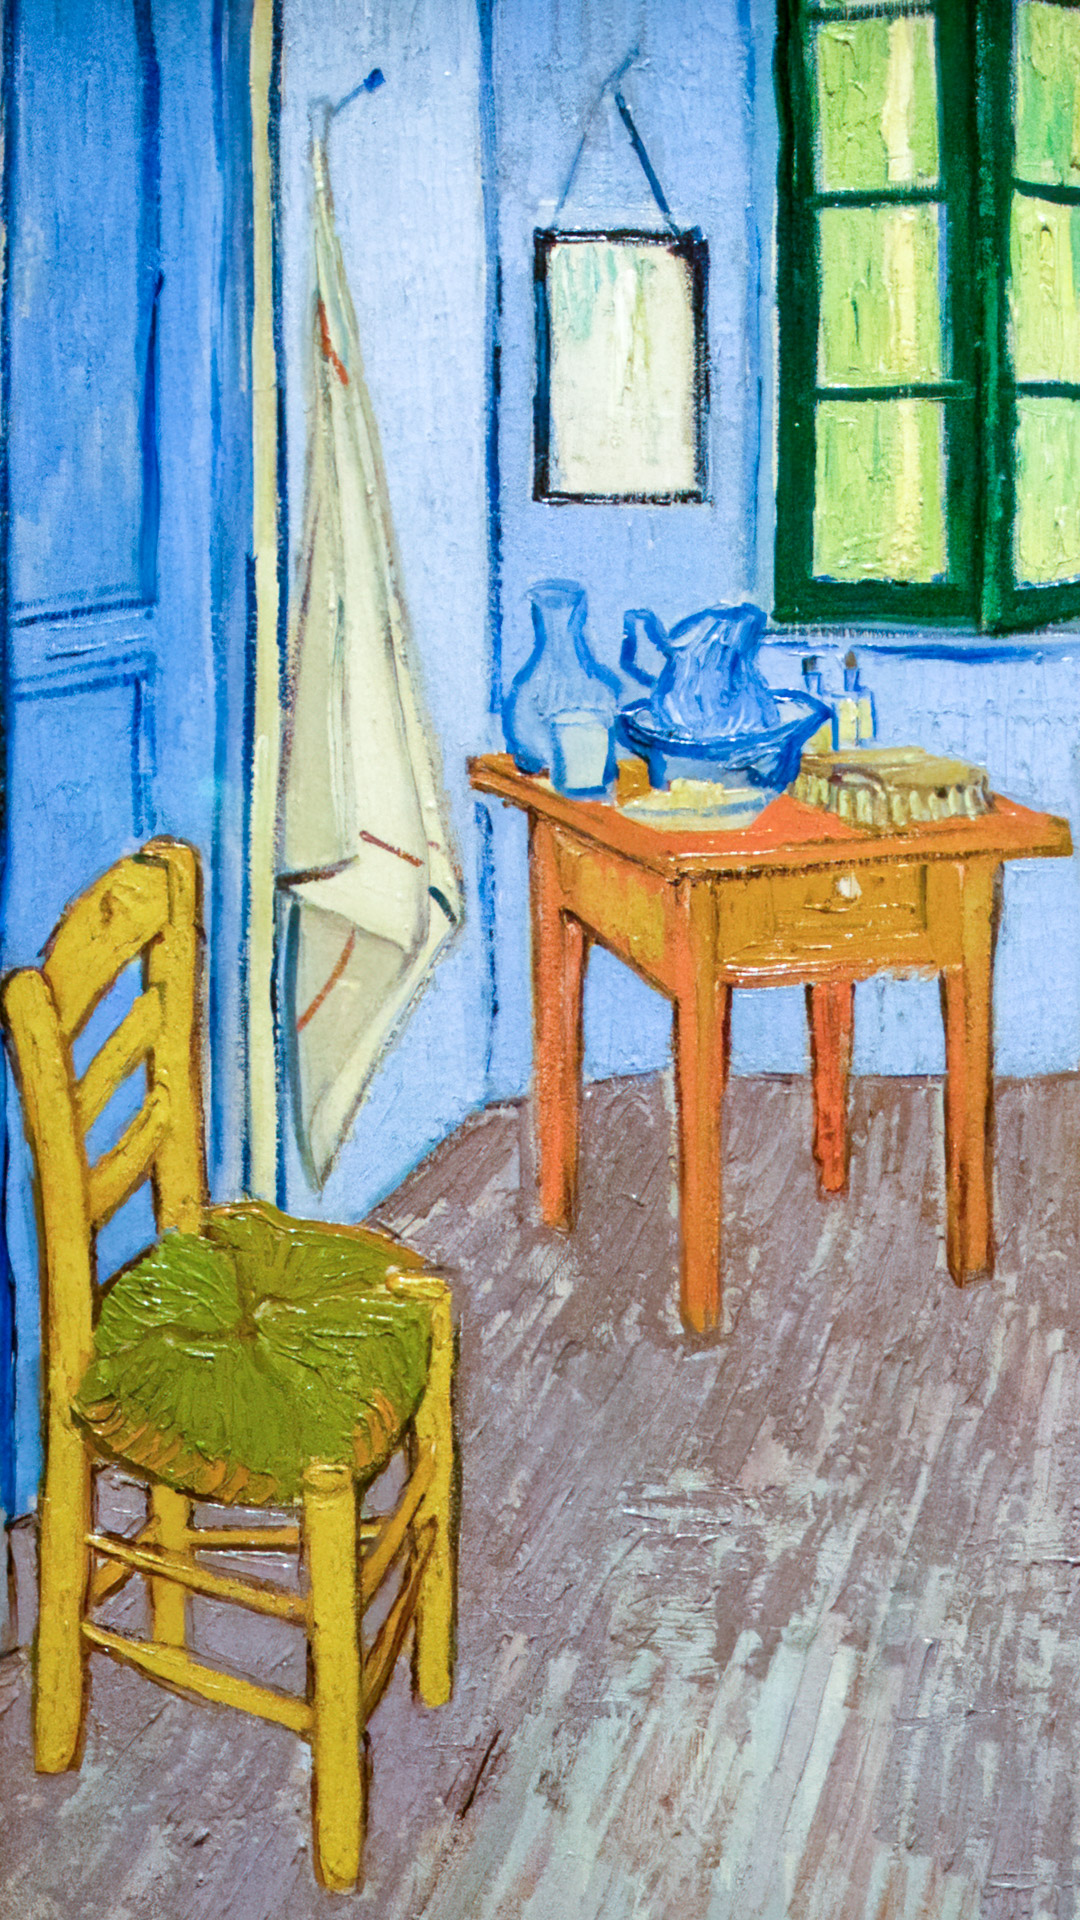 Experience the vibrancy of van Gogh's 'Room in Arles' on your Android for a visually stunning backdrop.